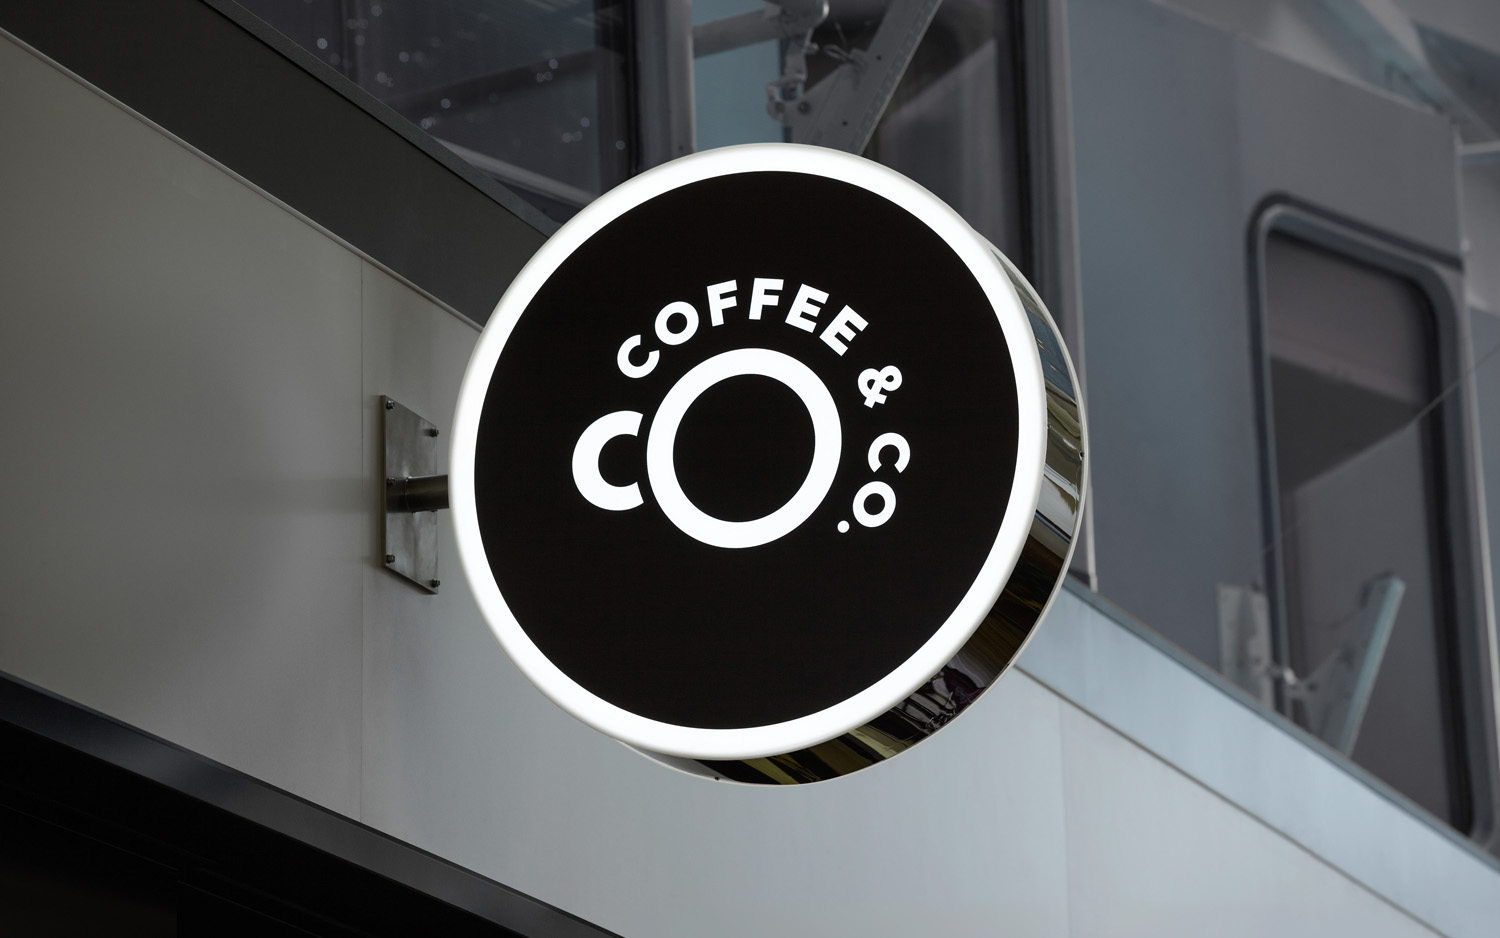 Brand identity and signage by Bond for cruise ship cafeteria concept Coffee & Co. 